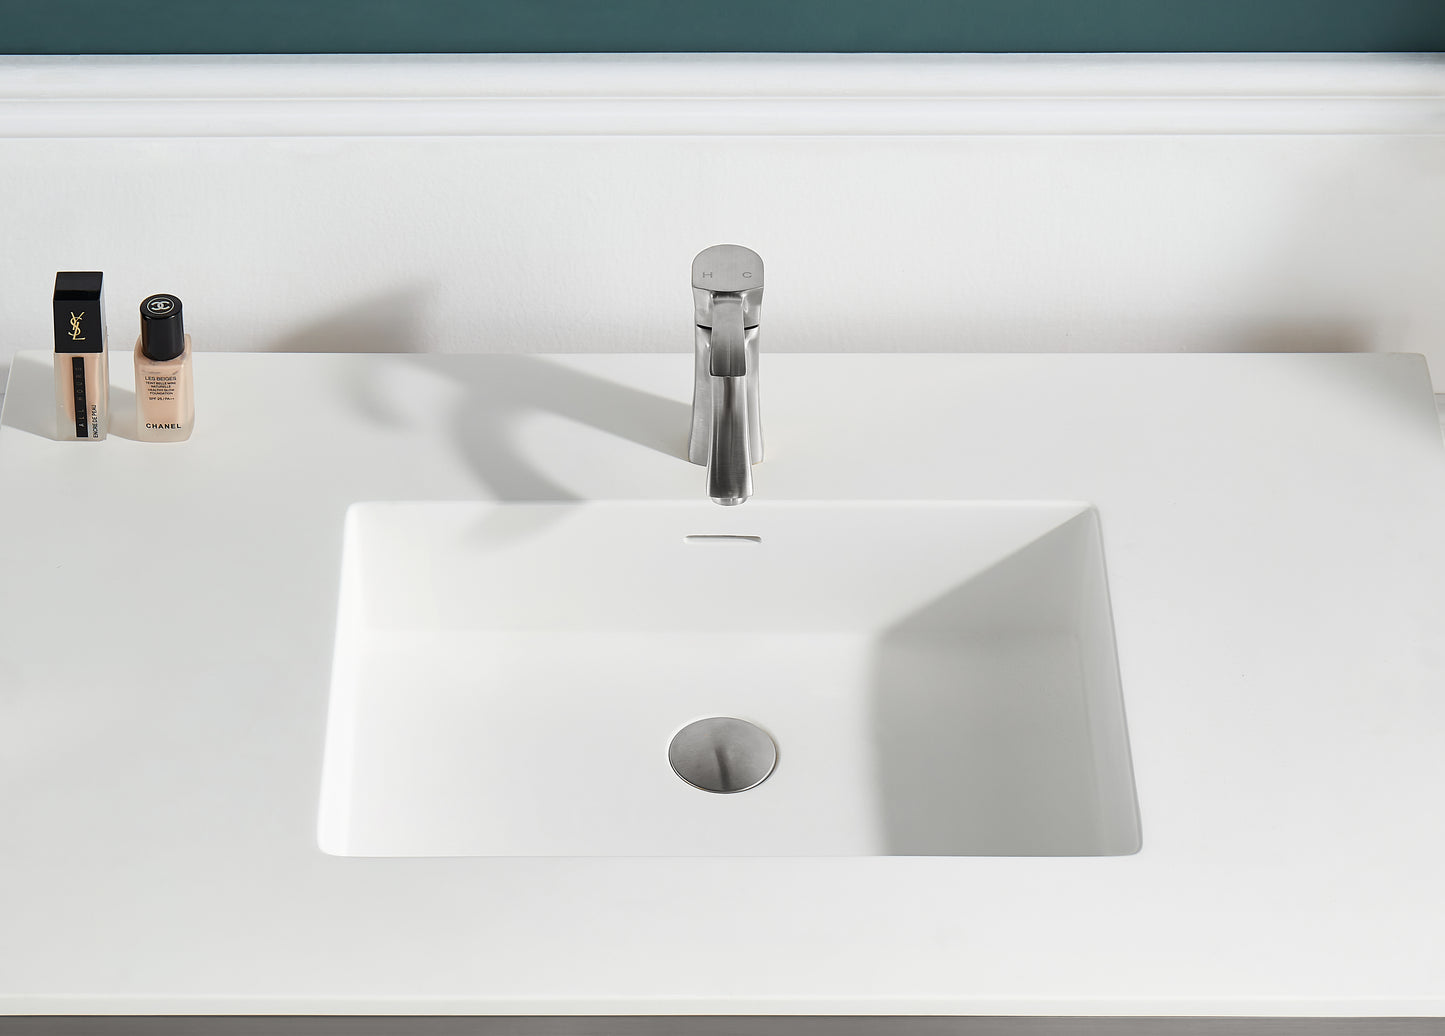 Orchard 36 in. Console Sink with Glossy White Counter Top